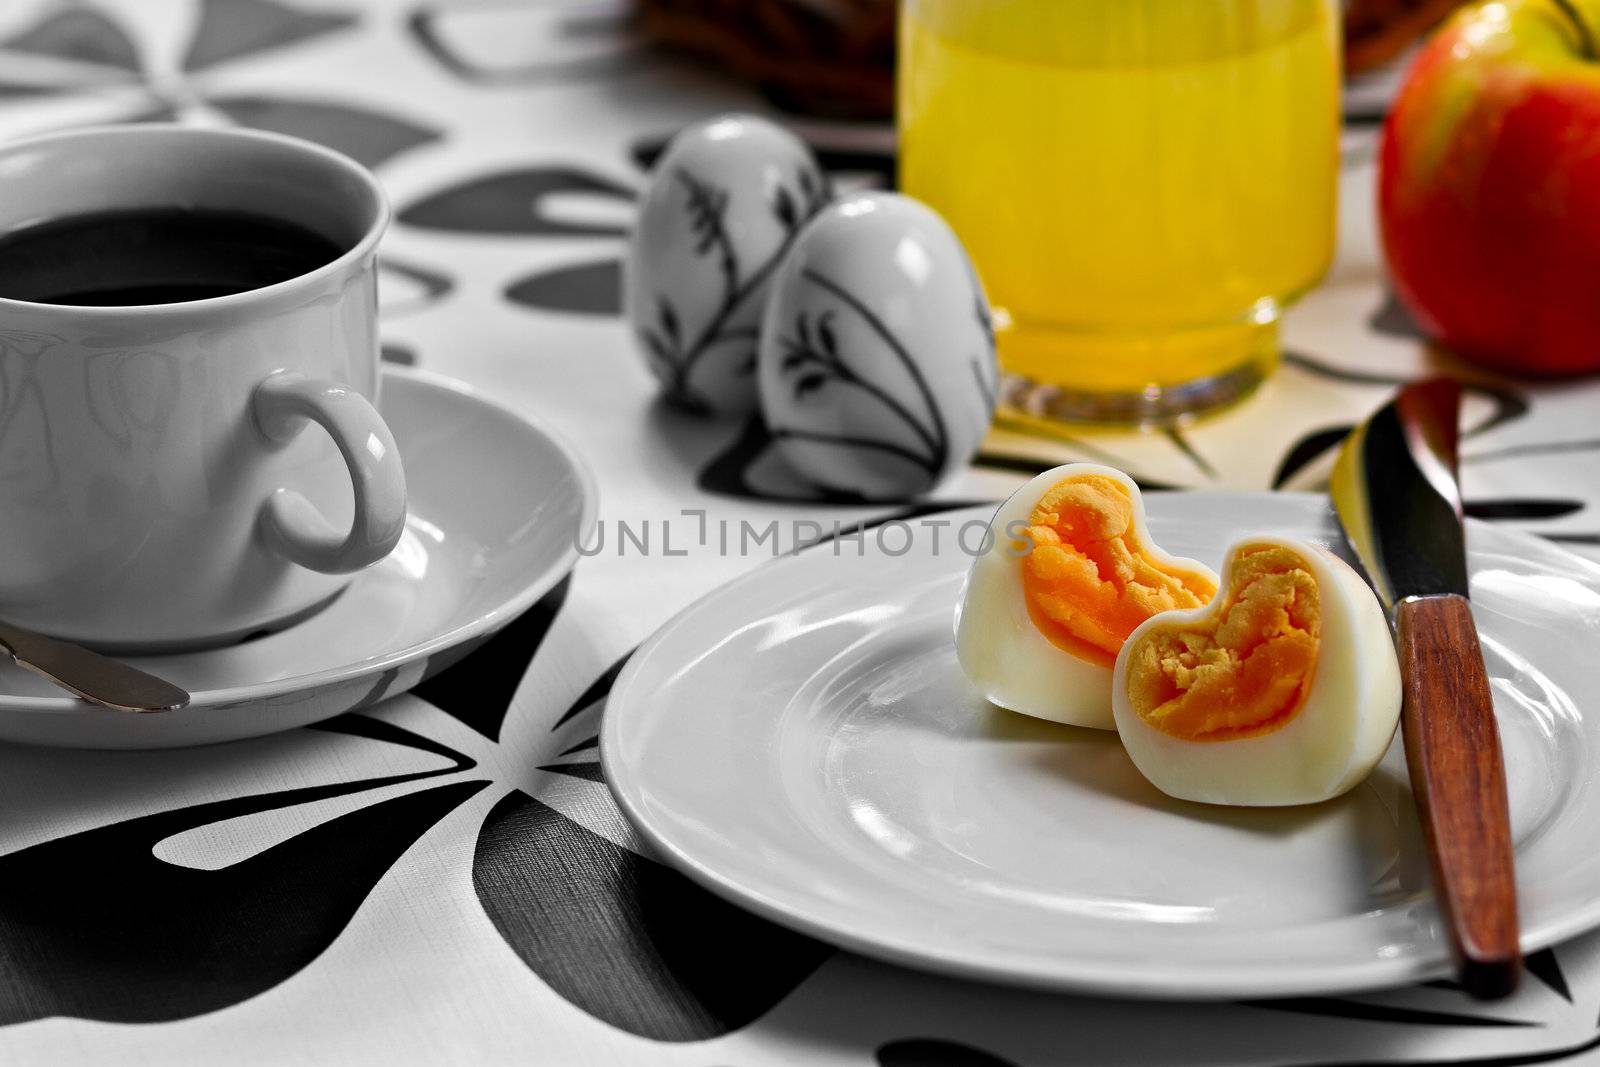 Breakfast with heart shaped egg, coffee, orange juice and an apple